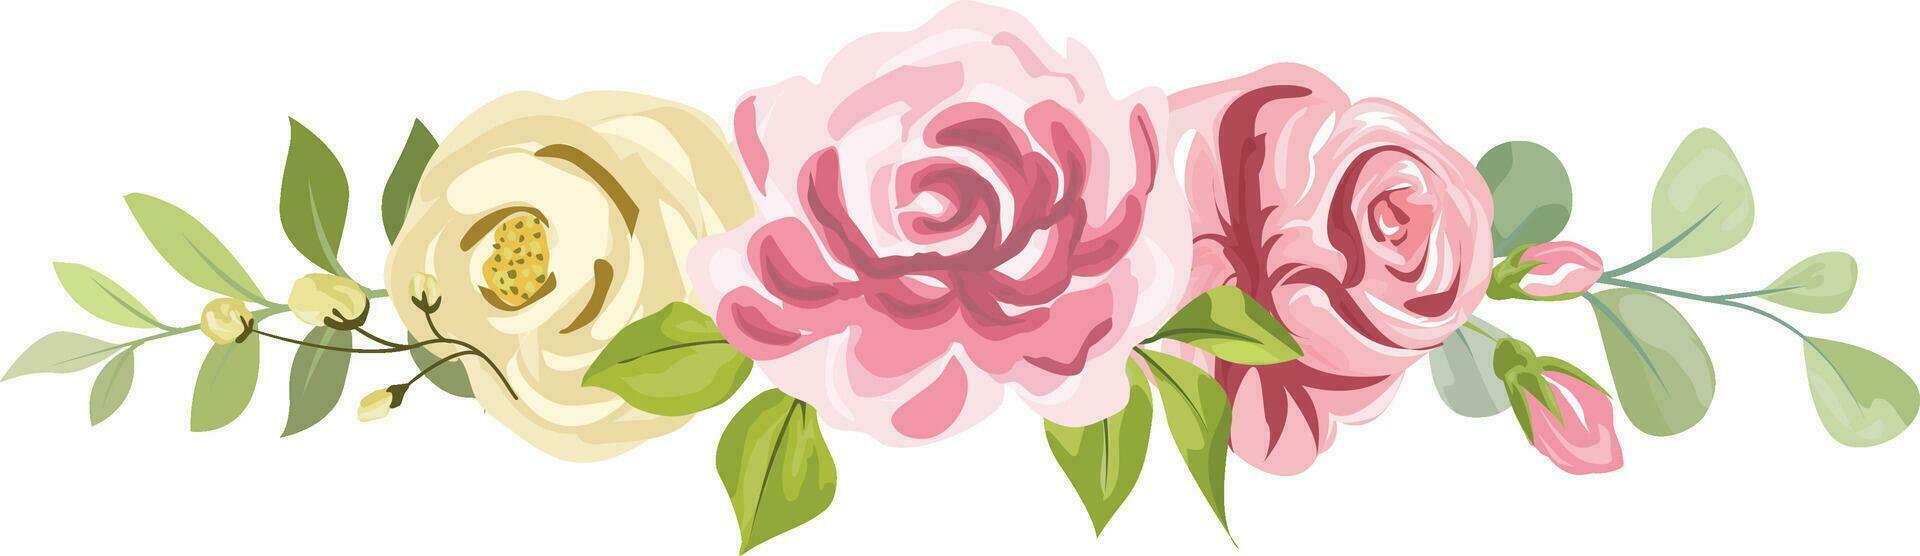 flower bouquet with beautiful roses and leaves vector